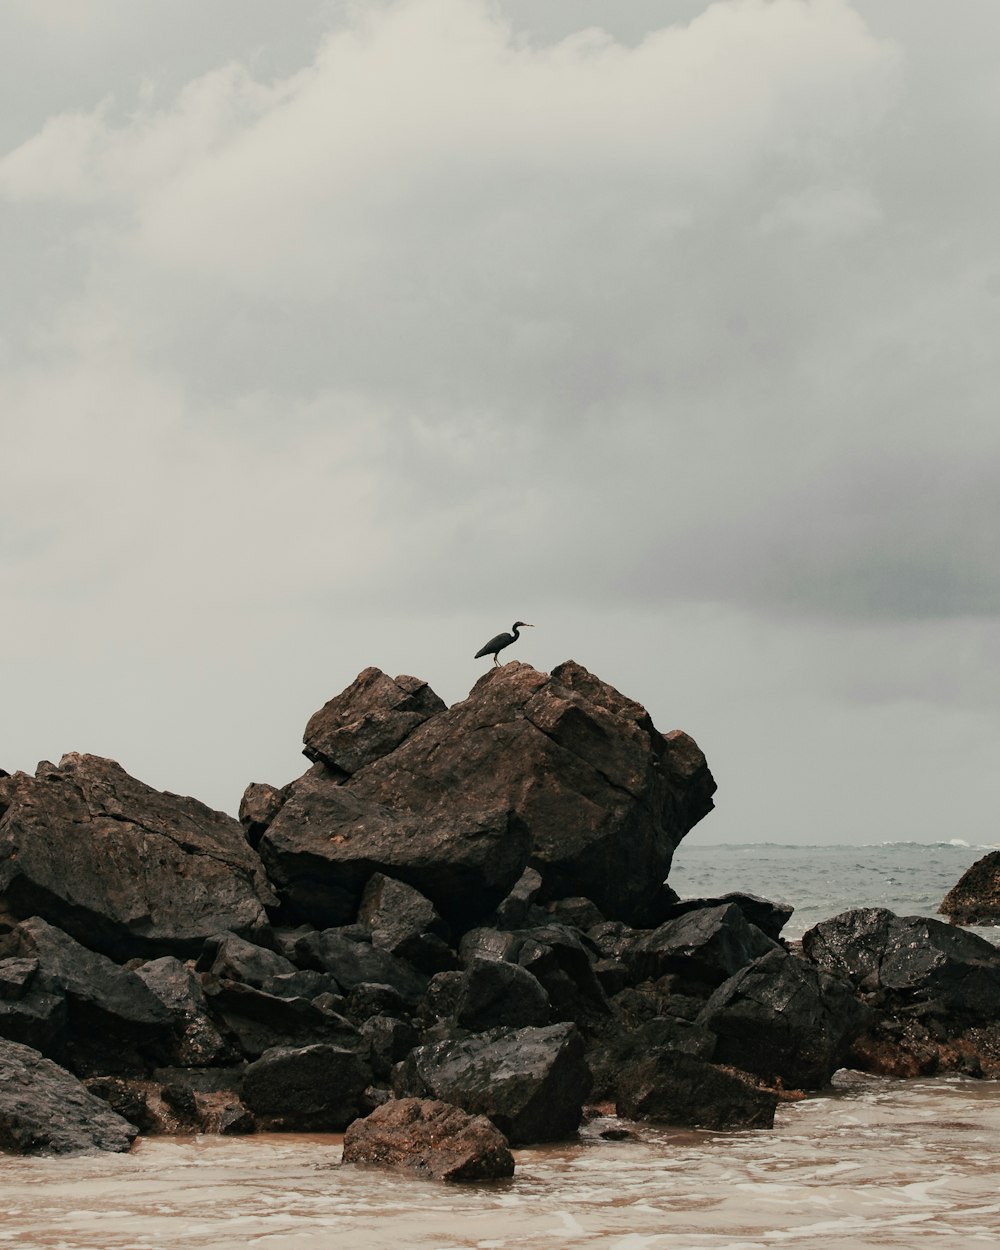 bird flying over the rocky shore during daytime